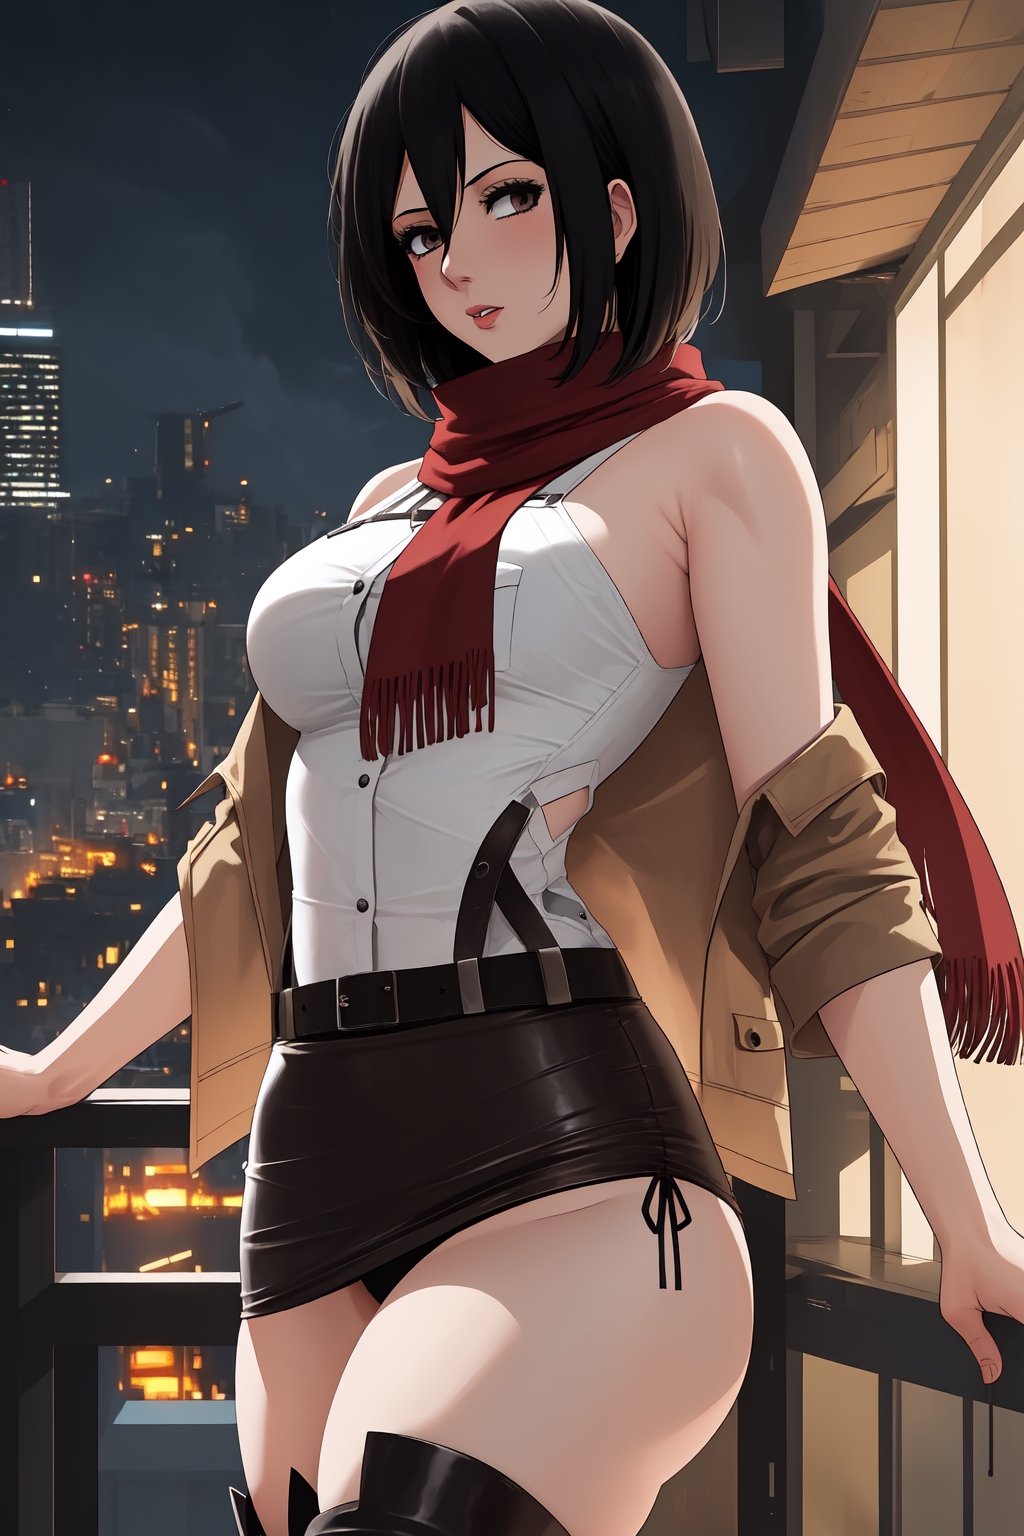 (masterpiece, best quality:1.2), solo, Mikasa Ackerman ,
Mikasa is a fairly tall and well-toned woman. She is of partial Asian heritage, with pale skin, gray eyes, and shaggy black hair that was long until she cut it to chin-length. 
a sleeveless white shirt, light brown jacket with the badge of the squad on both shoulders, on the front left pocket and on the center of the back, a light-colored shirt, a dark brown leather hip wrap skirt, and dark brown knee-high leather boots. a red scarf that she almost always wears.
Mikasa Ackerman, Smooth and flawless armpits, Smooth and flawless skin, 
(ultrahigh resolution textures), in dynamic pose, bokeh, (intricate details, hyperdetailed:1.15), detailed, HDR+, ,Xter, Mikasa Ackerman, european town background.,cool